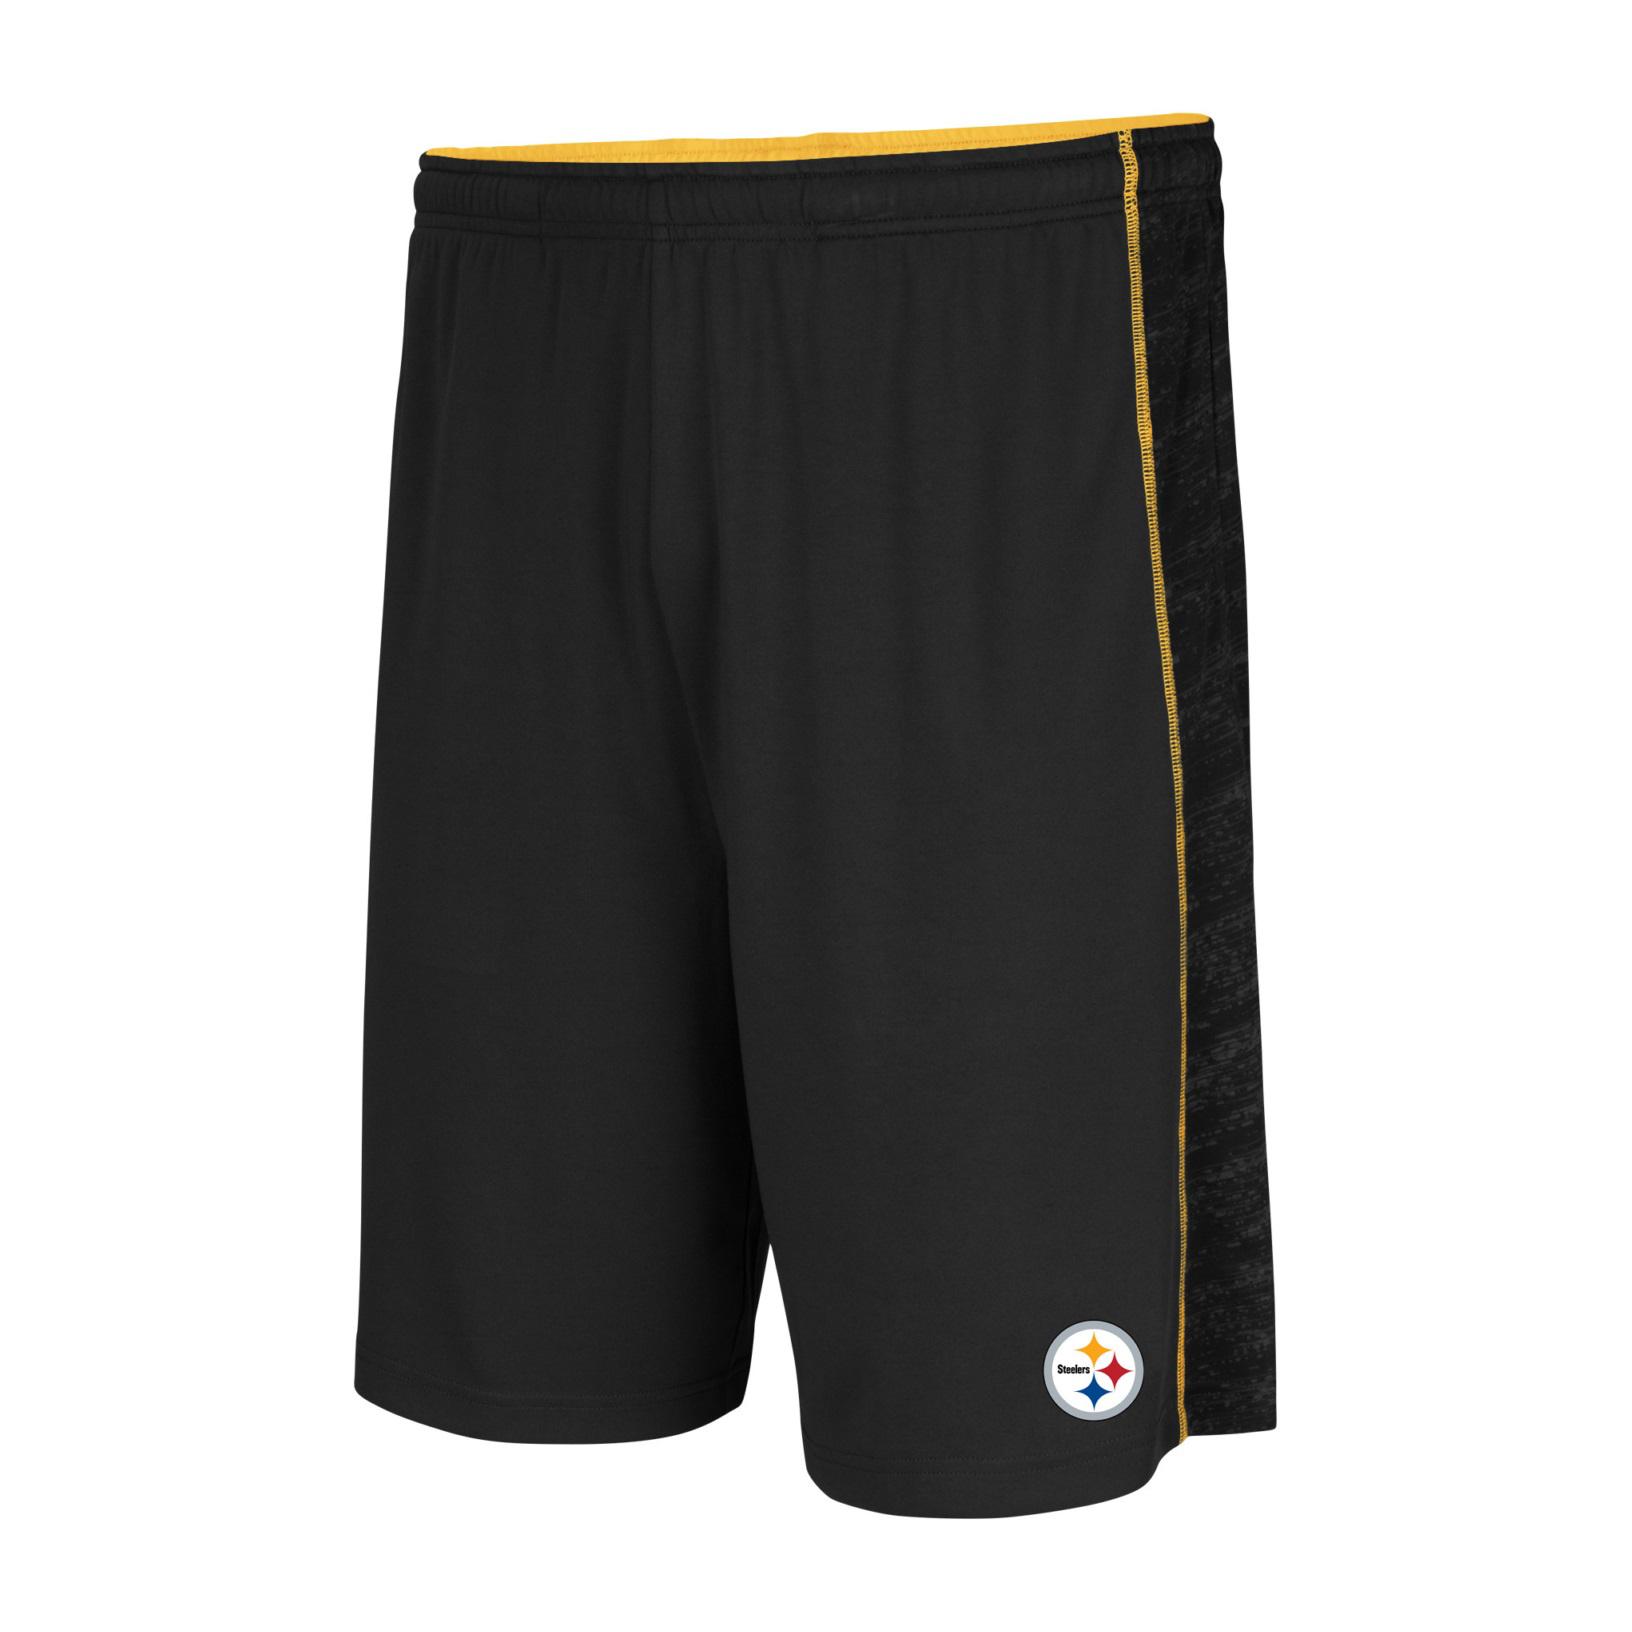 NFL Men's Athletic Shorts - Pittsburgh Steelers